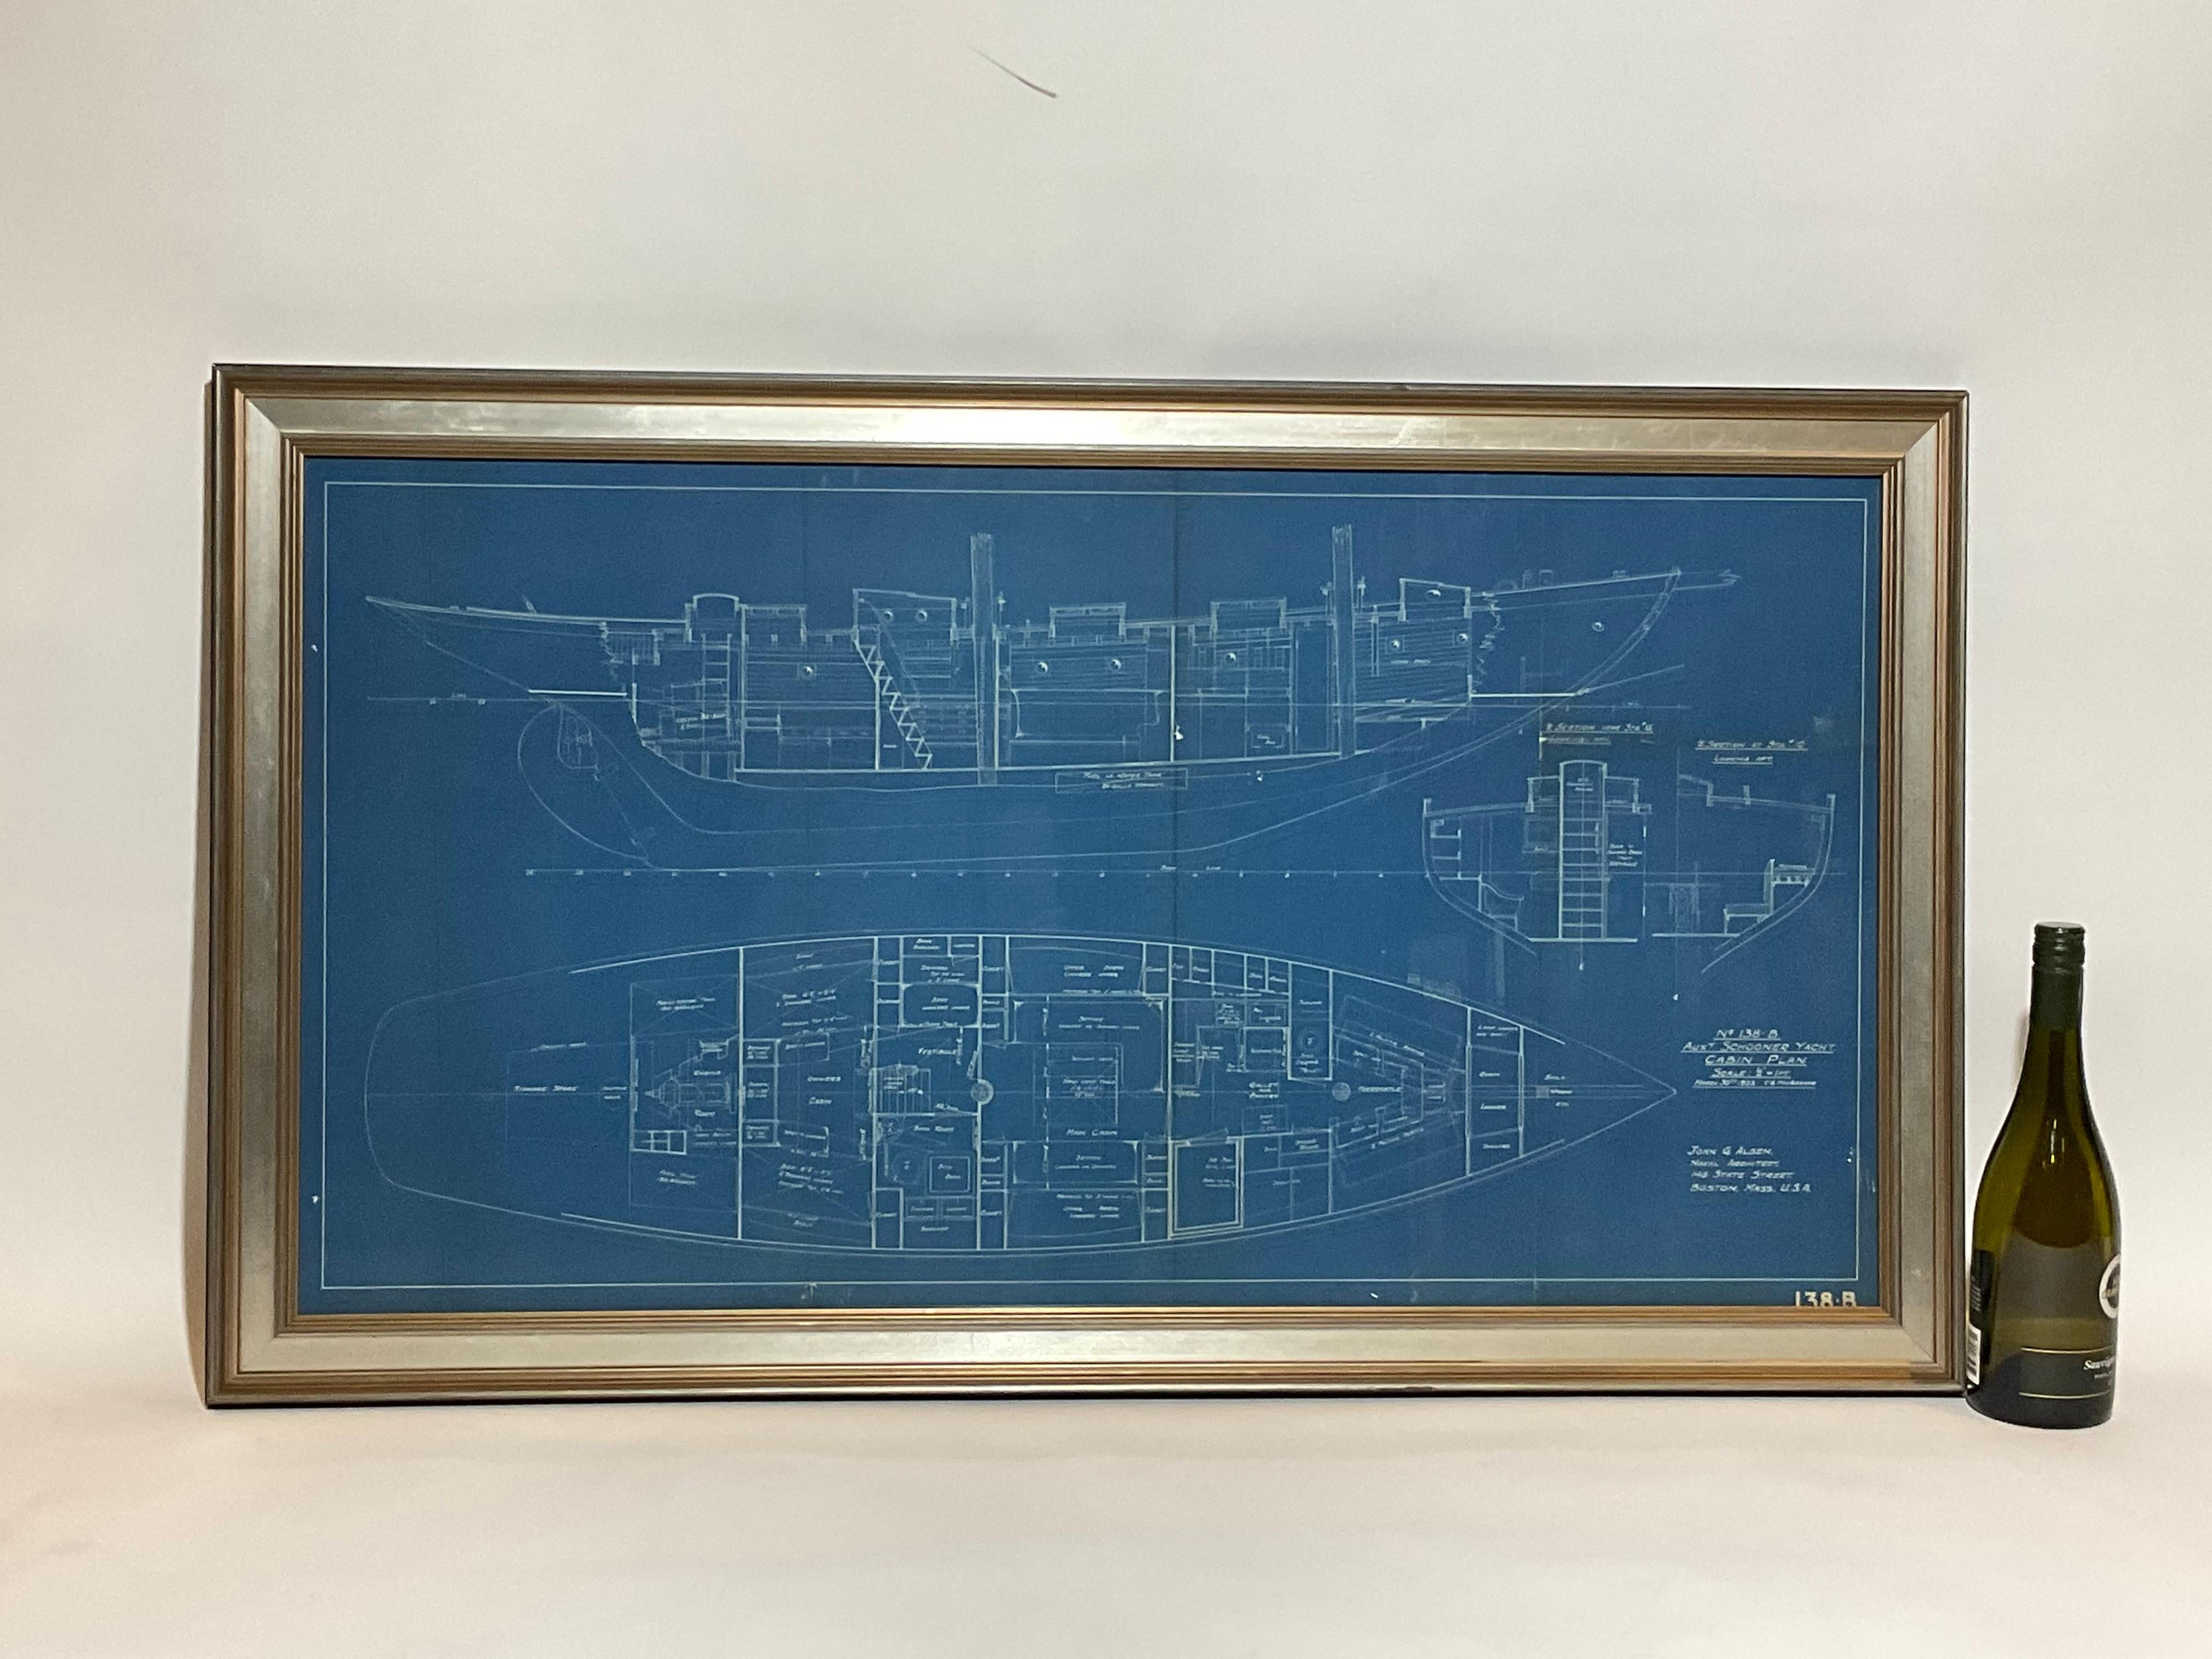 Authentic Naval Architects Blueprint of a Sixty Two Foot Schooner designed by John Alden of Boston. The plan was drawn by C.G. McGregor. This is a cabin plan drawn at one half inch equals one foot. The plan shows owners cabin, main cabin, bathrooms,